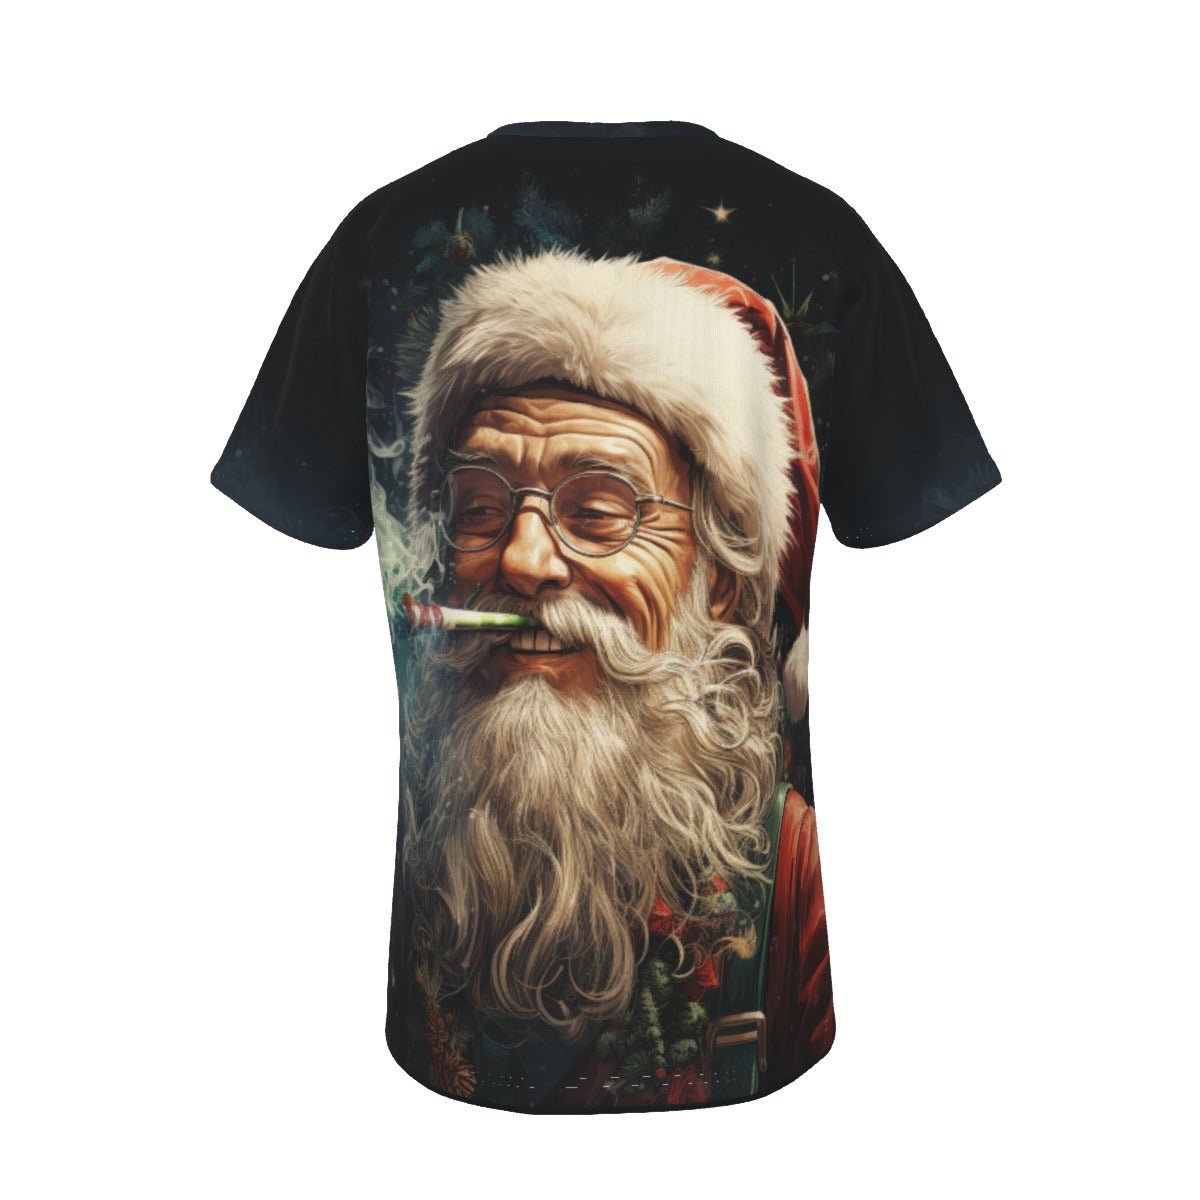 Mens Short Sleeve Christmas Tee - Front and Back - Santa Joint - Festive Style